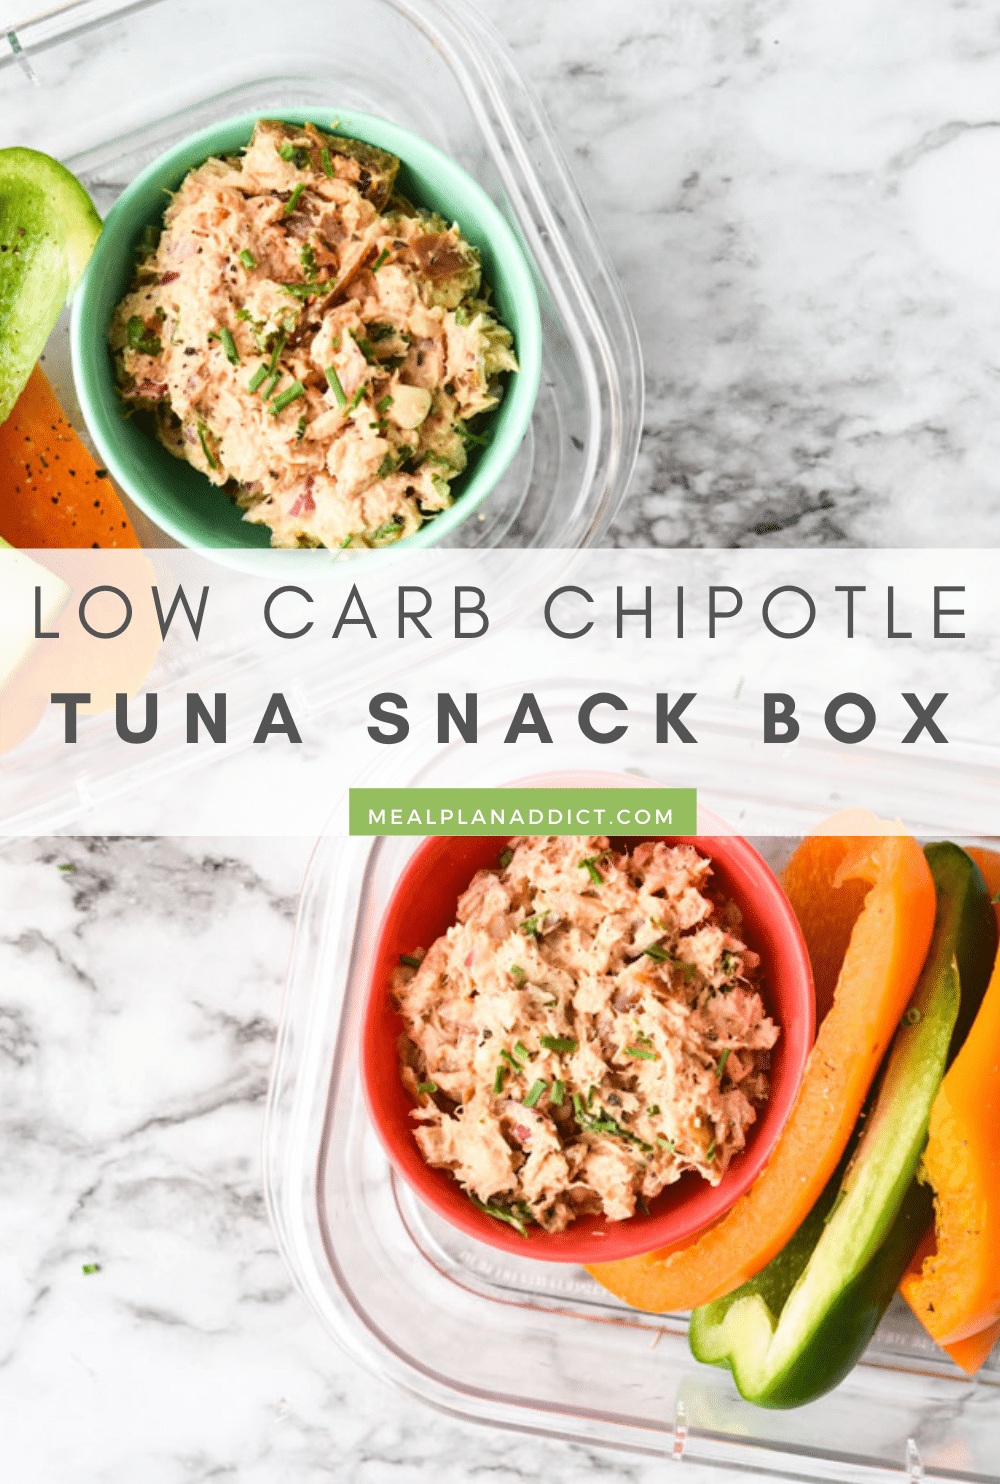 Tuna snack pin for Pinterest